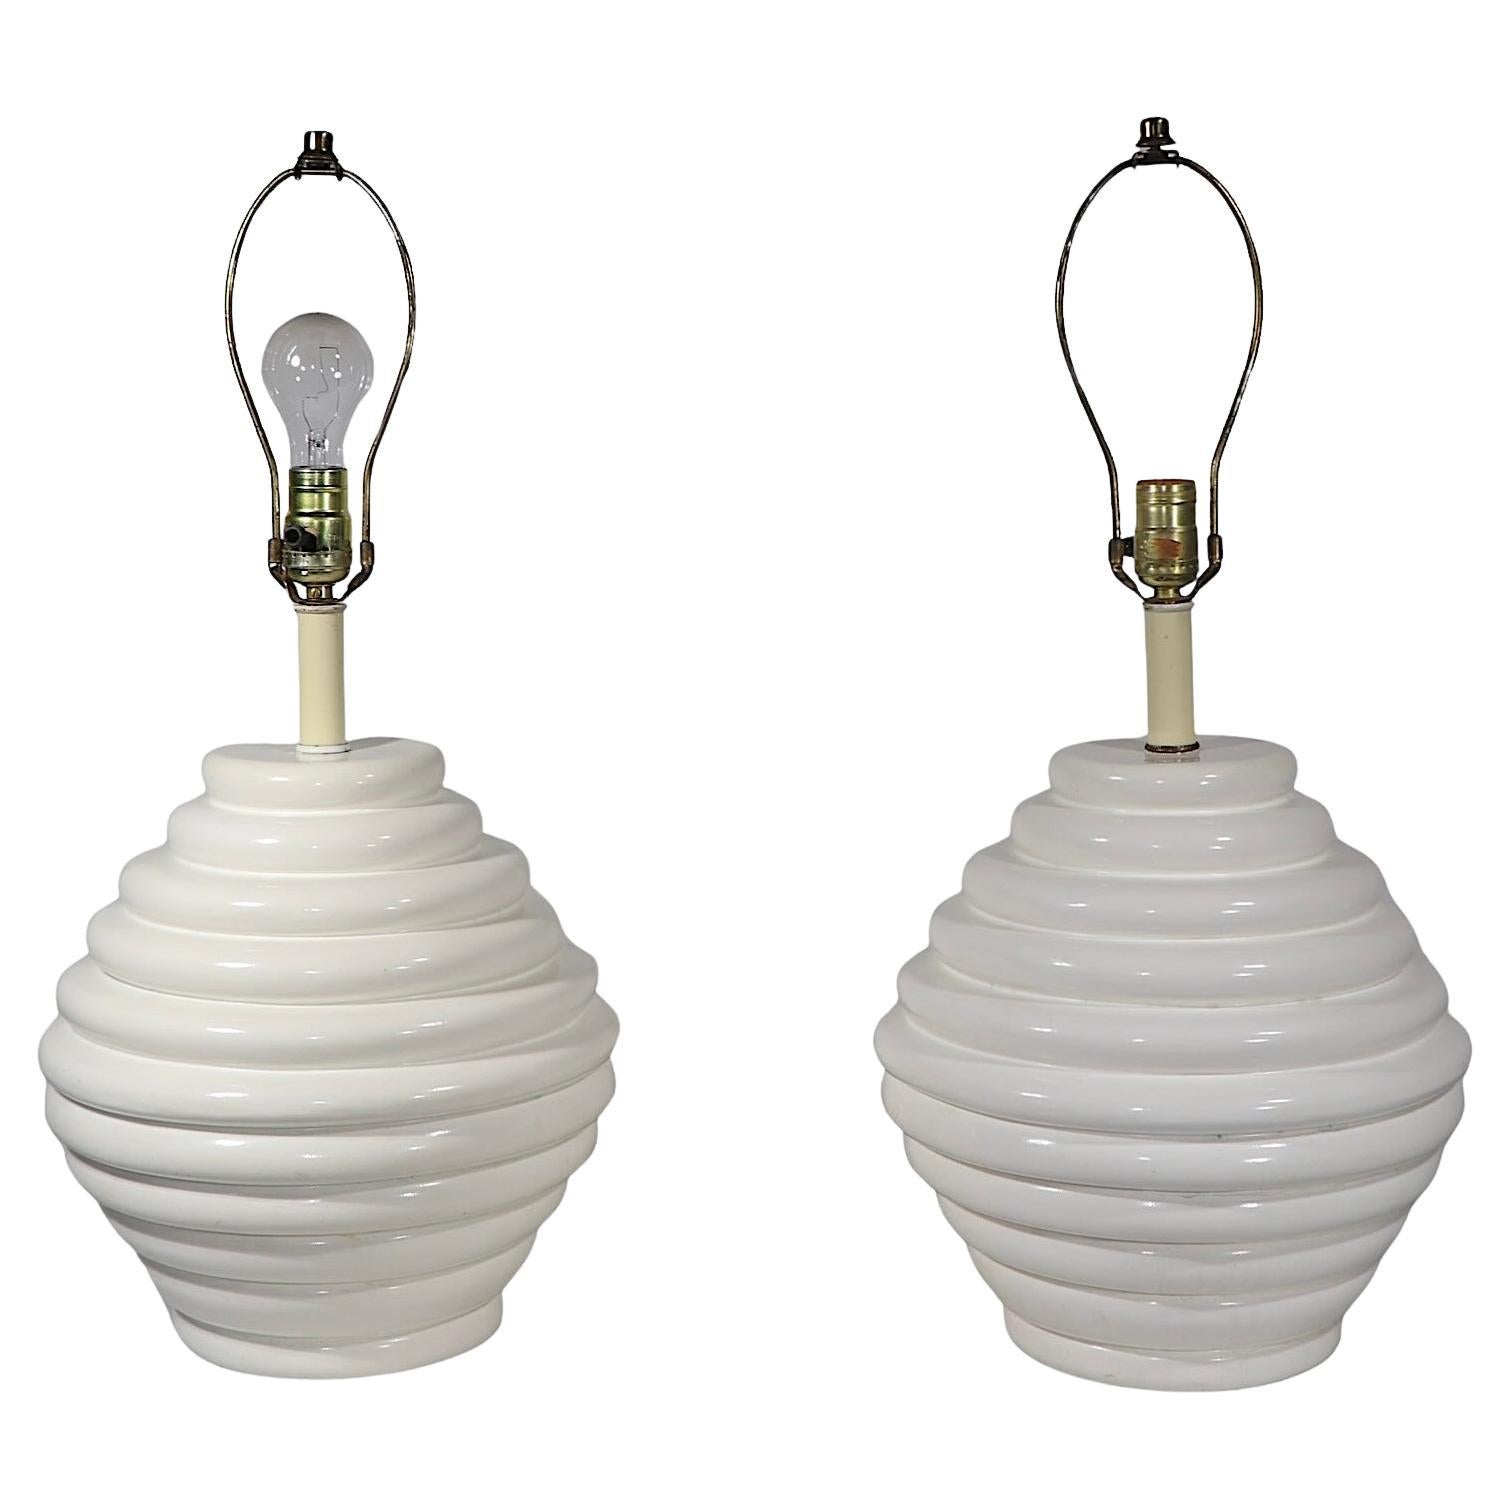 Pr. Mid Century Space Age Bulbous Form Table Lamps in White Finish c. 1950/70's